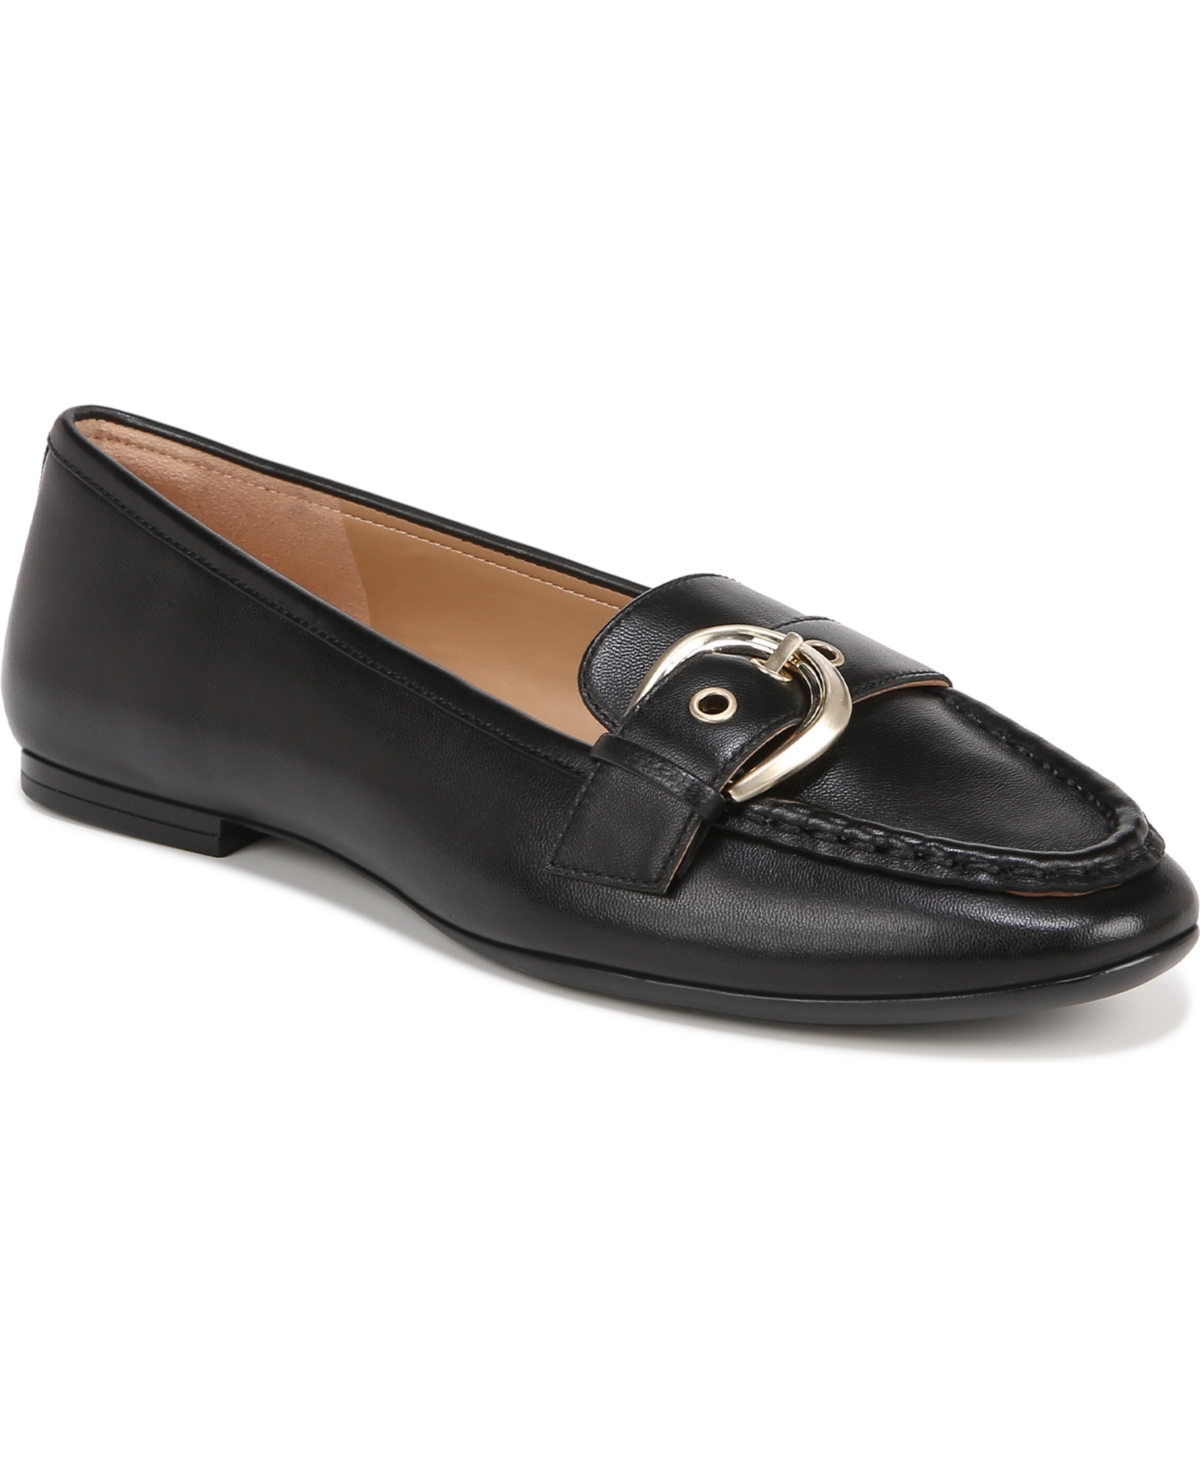 Naturalizer Lola 2 Slip-on Buckle Flats In Black Leather